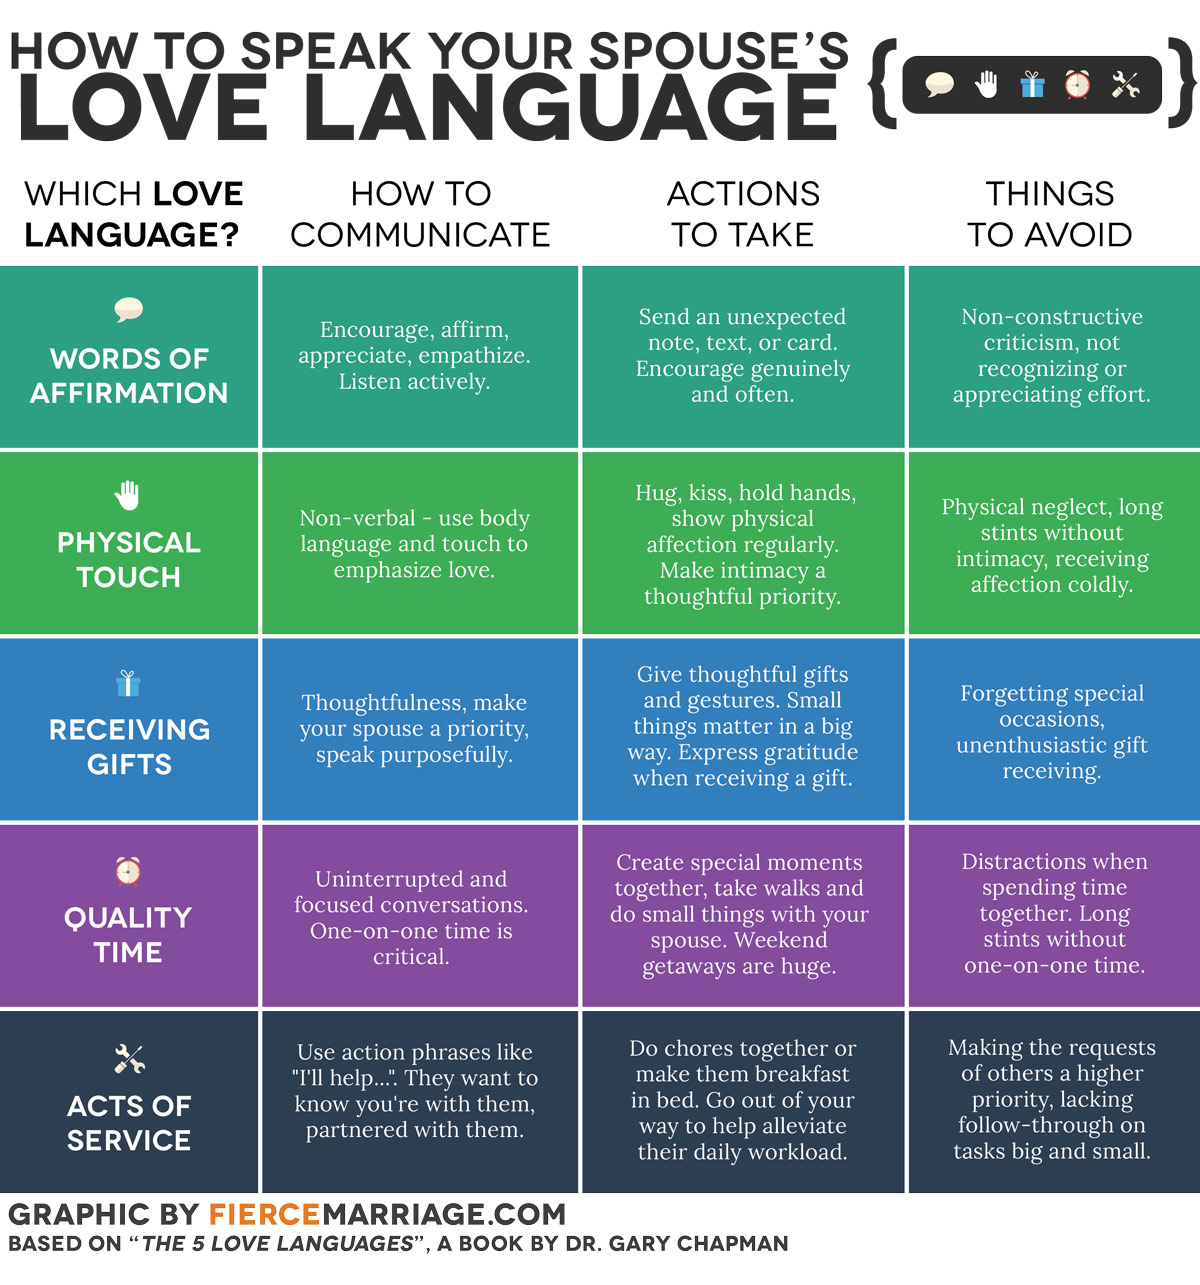 How To Speak Your Spouse S Love Language And What To Avoid